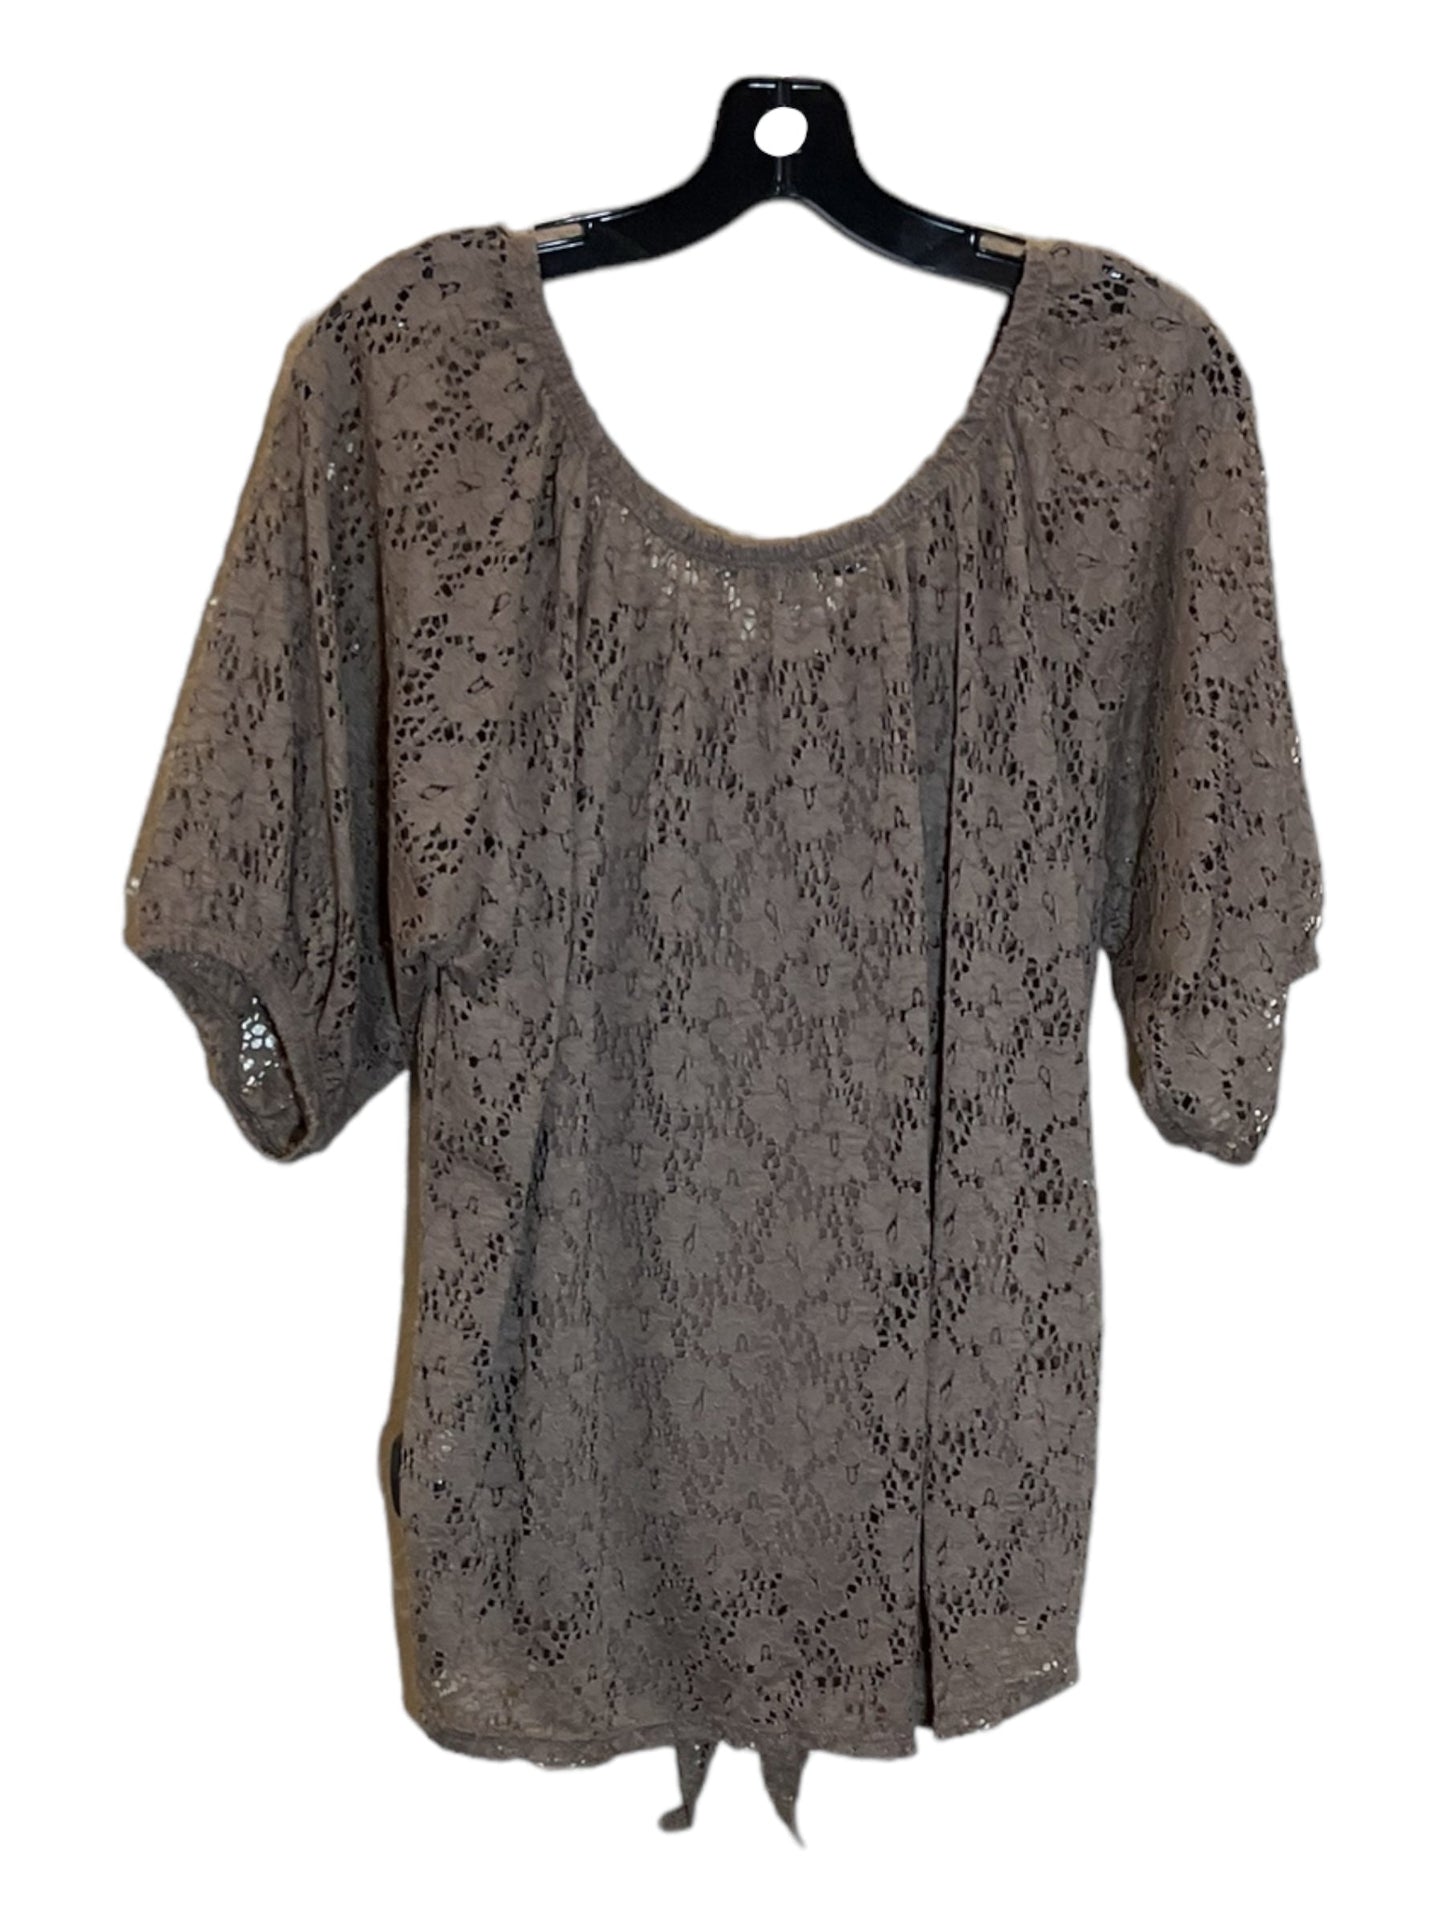 Brown Top Short Sleeve French Laundry, Size Xl